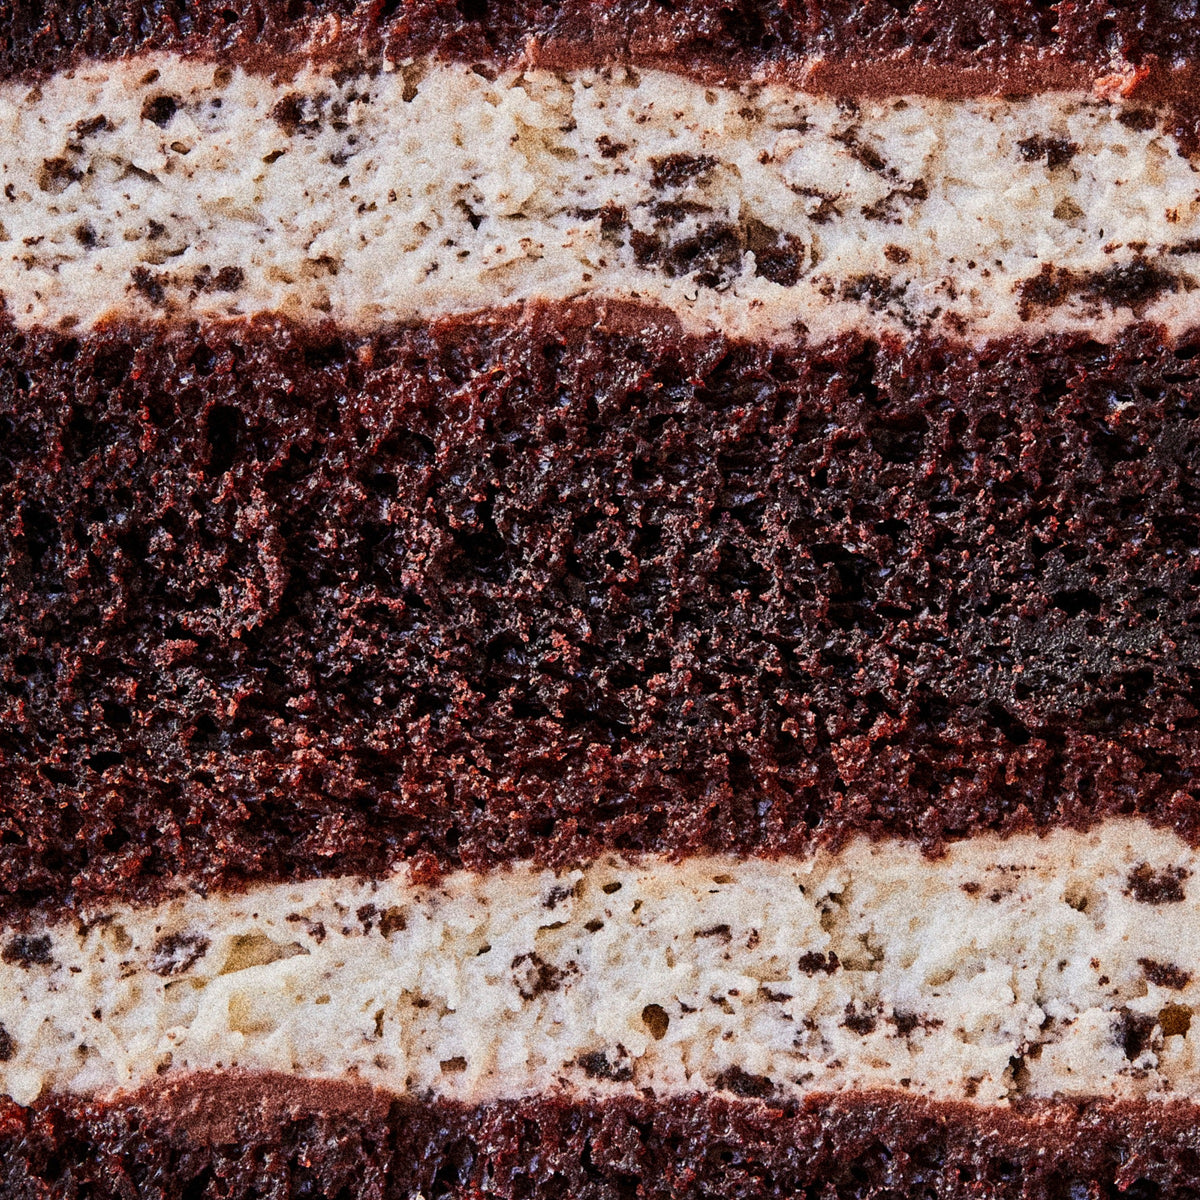 A close look on our Chocolate &amp; cookies cream cake flavour from our cake from our sample box.